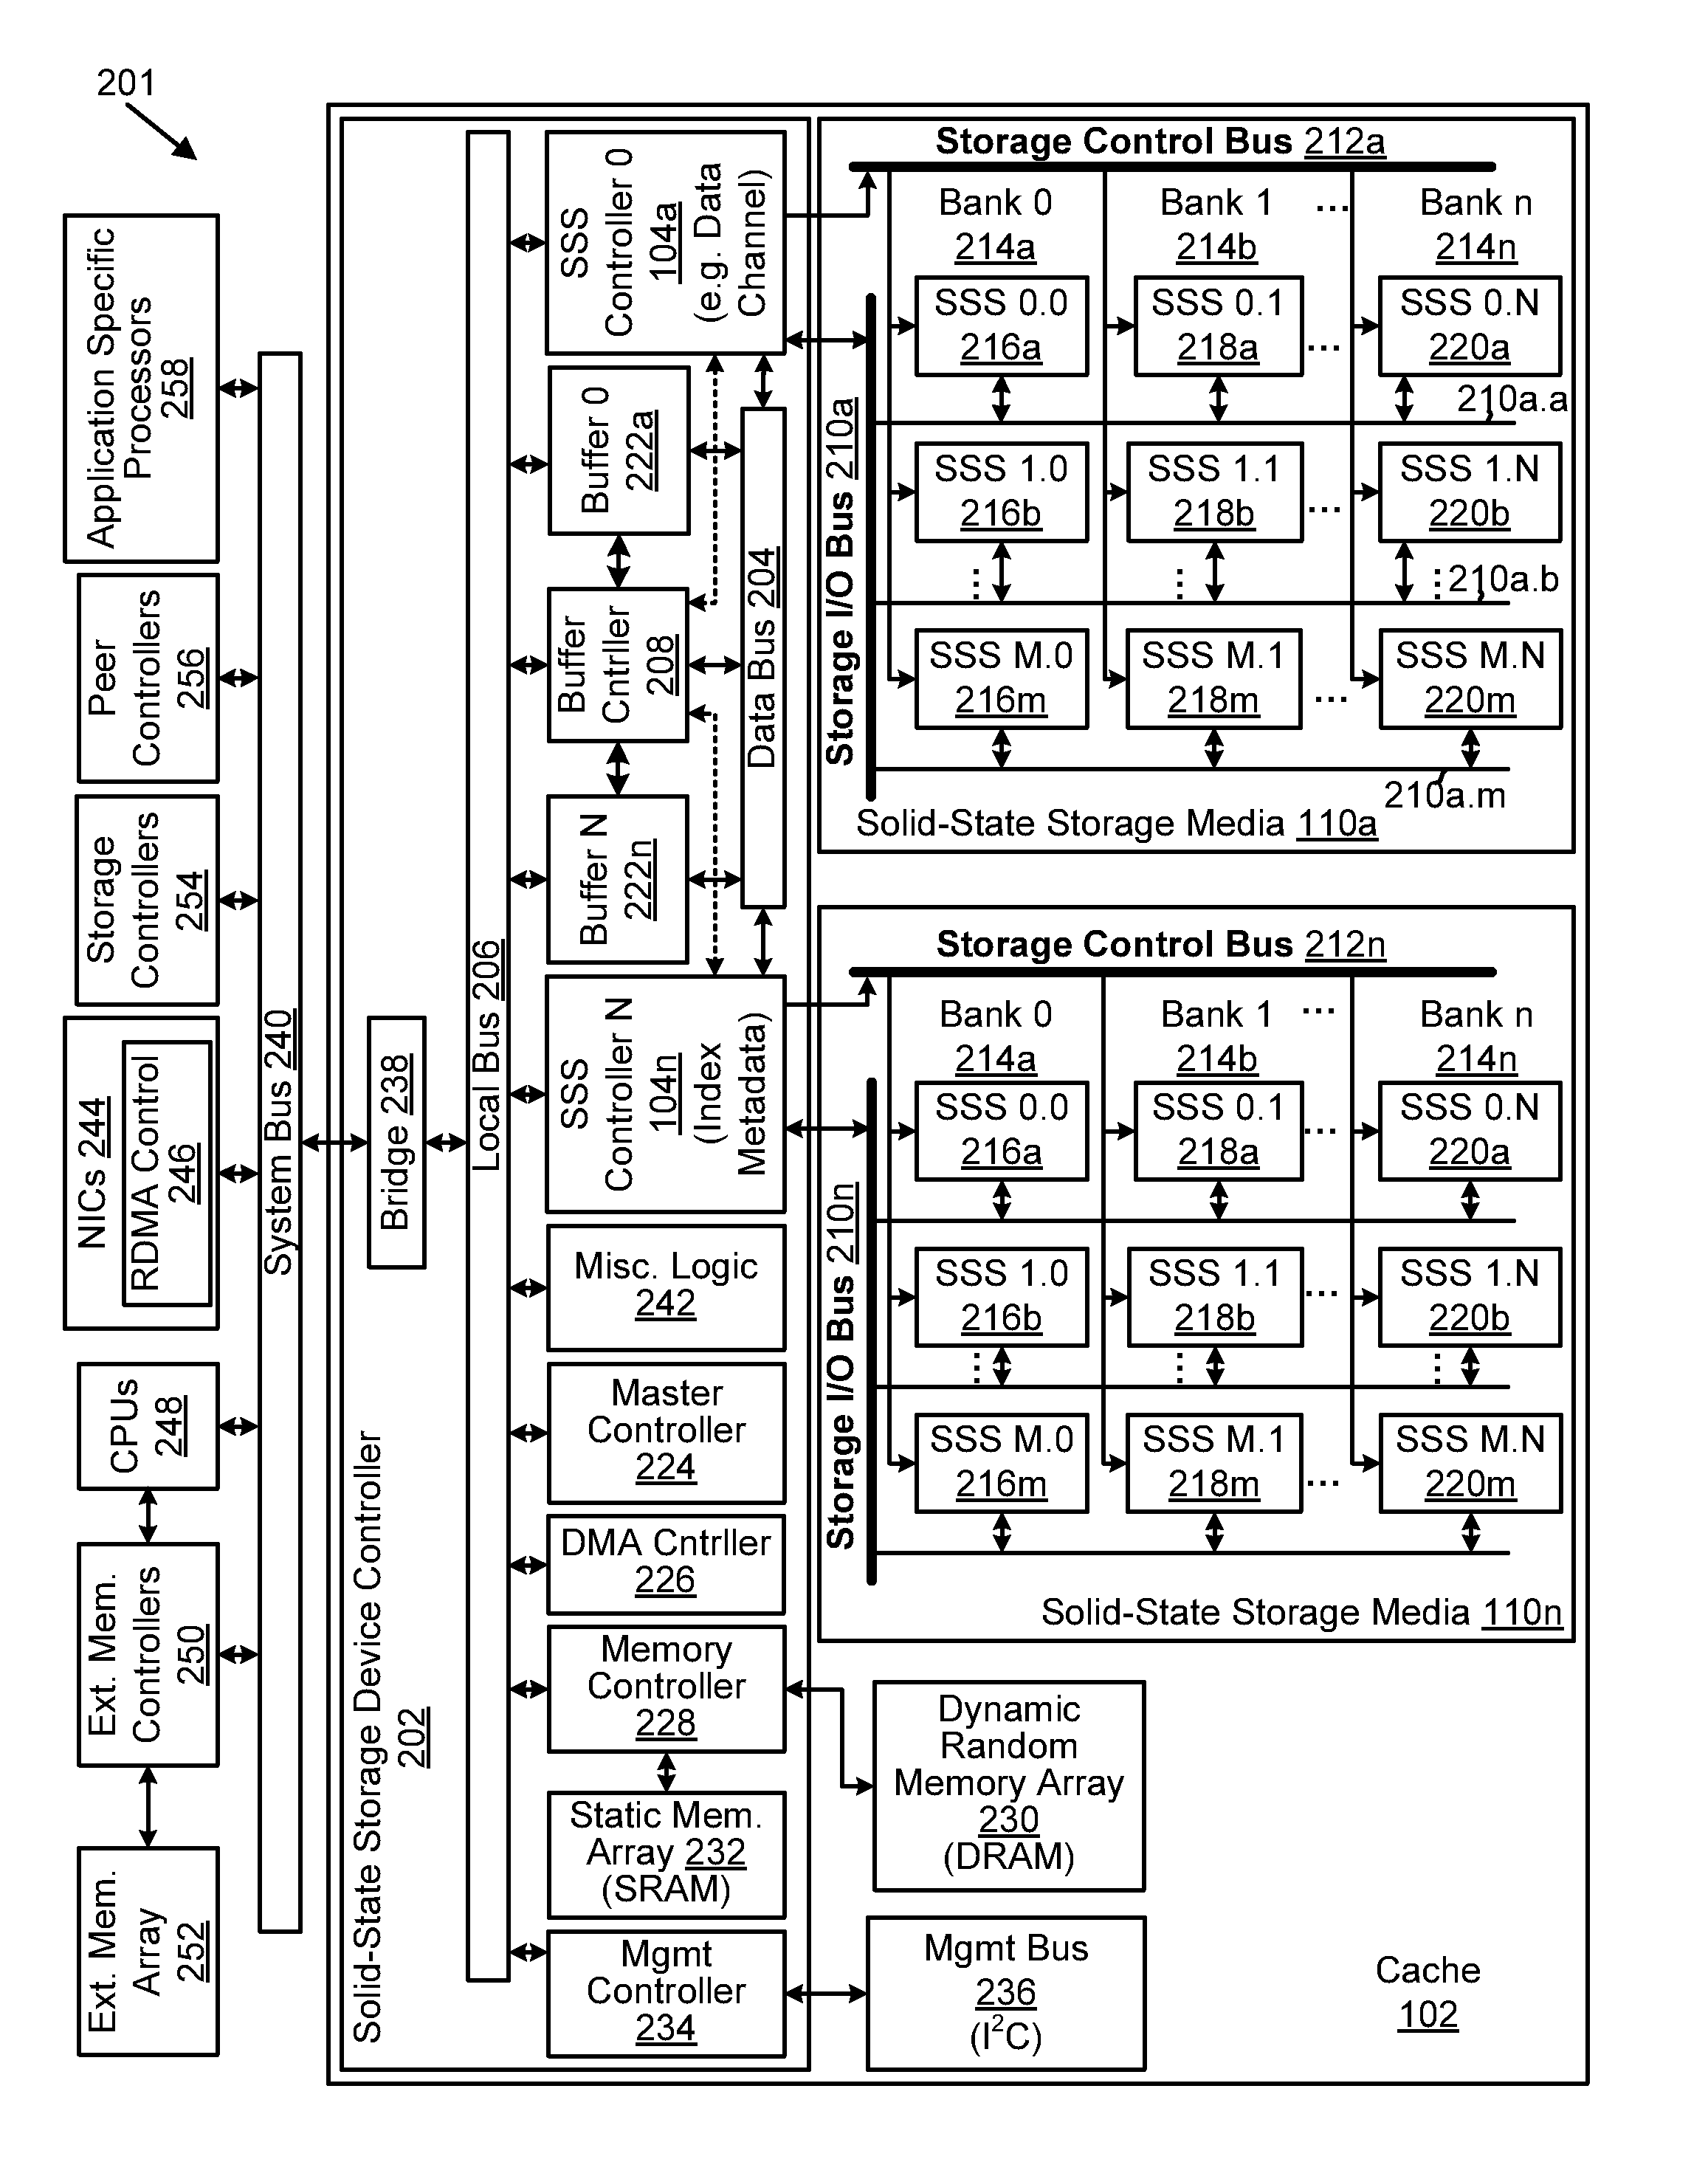 Apparatus, System, and Method for Storing Metadata